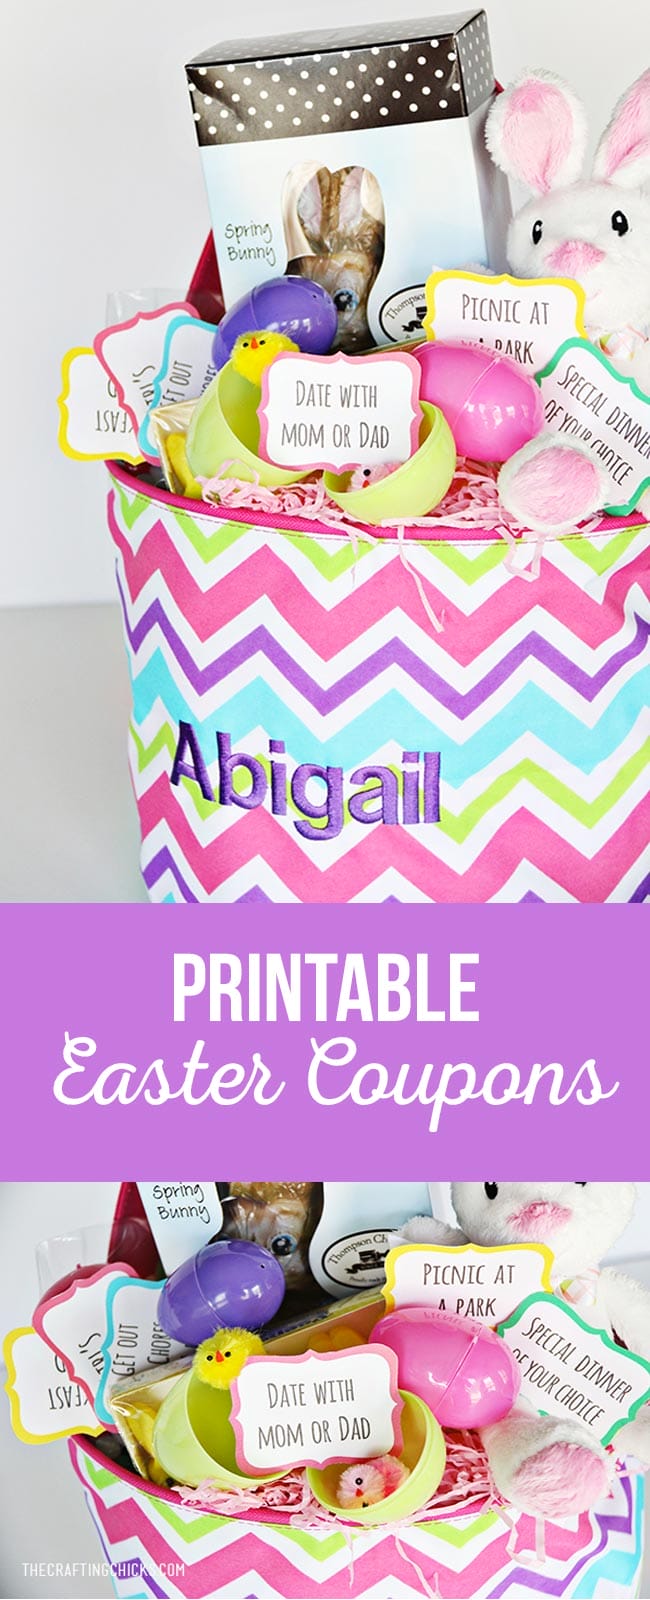 Printable Easter Coupons Egg Fillers